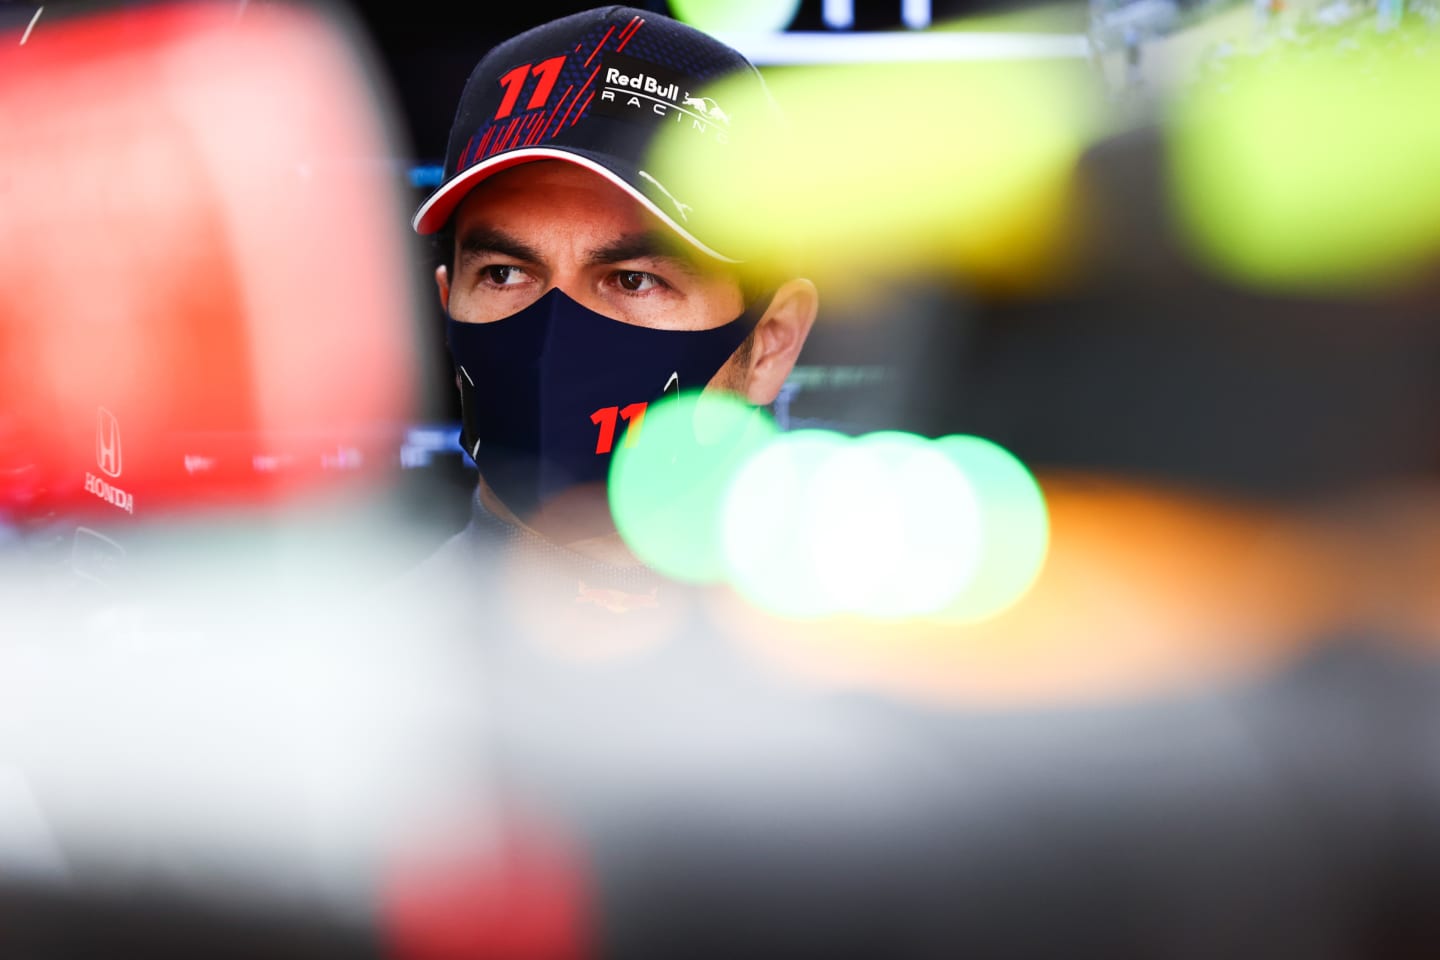 AUSTIN, TEXAS - OCTOBER 22: Sergio Perez of Mexico and Red Bull Racing prepares to drive in the garage during practice ahead of the F1 Grand Prix of USA at Circuit of The Americas on October 22, 2021 in Austin, Texas. (Photo by Mark Thompson/Getty Images)